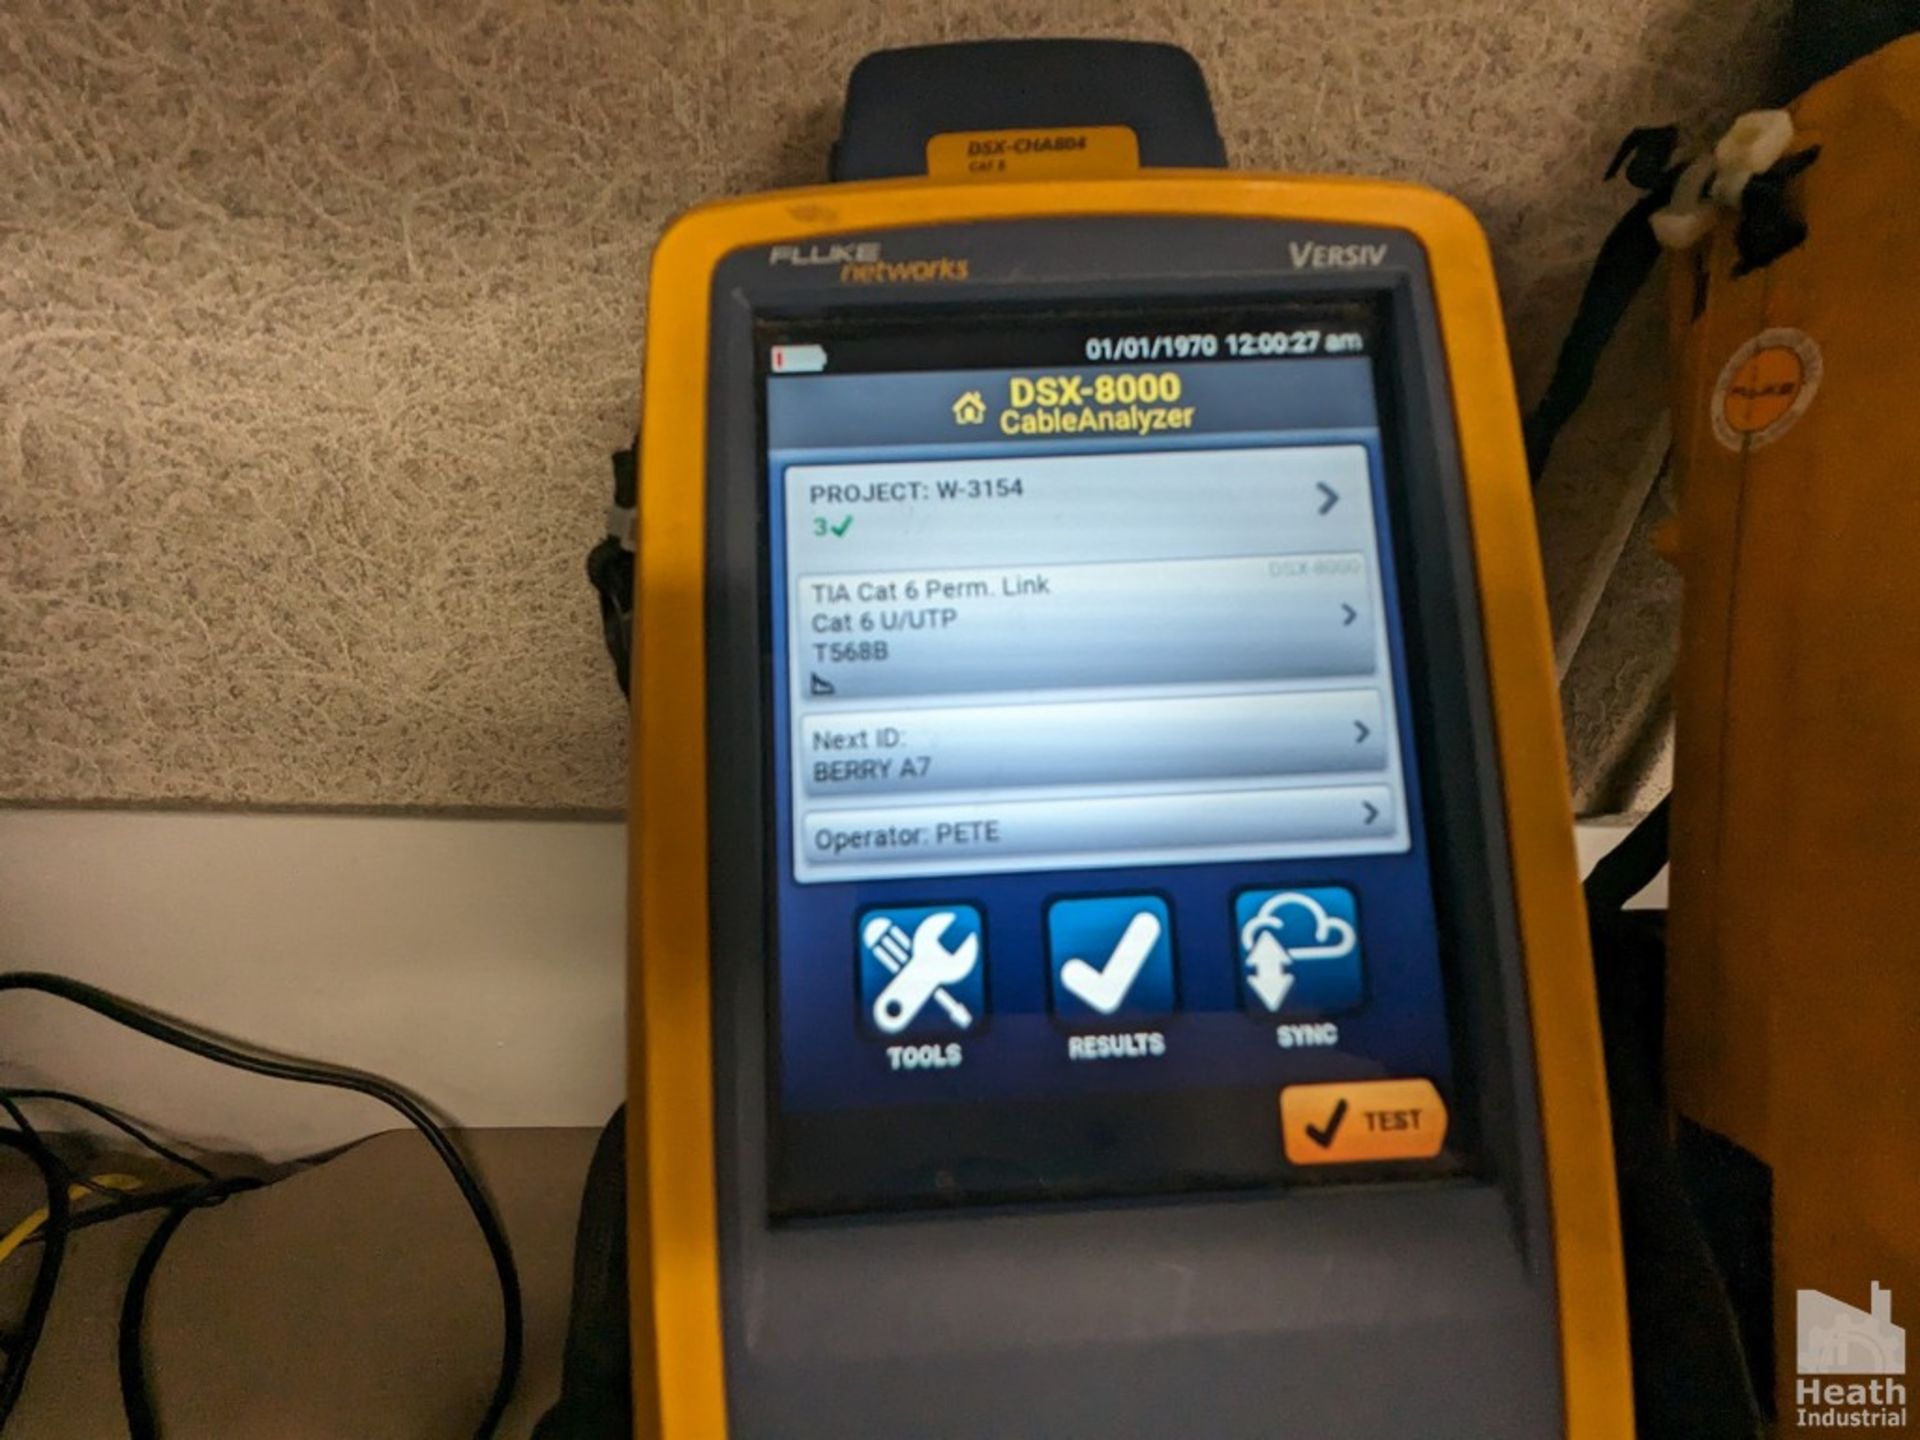 FLUKE MODEL VERSIV DSX-8000 CABLE ANALYZER WTIH DSC-CHA804 CAT6 CHANNEL ADAPTERS, CASE, ACCESSORIES - Image 4 of 4